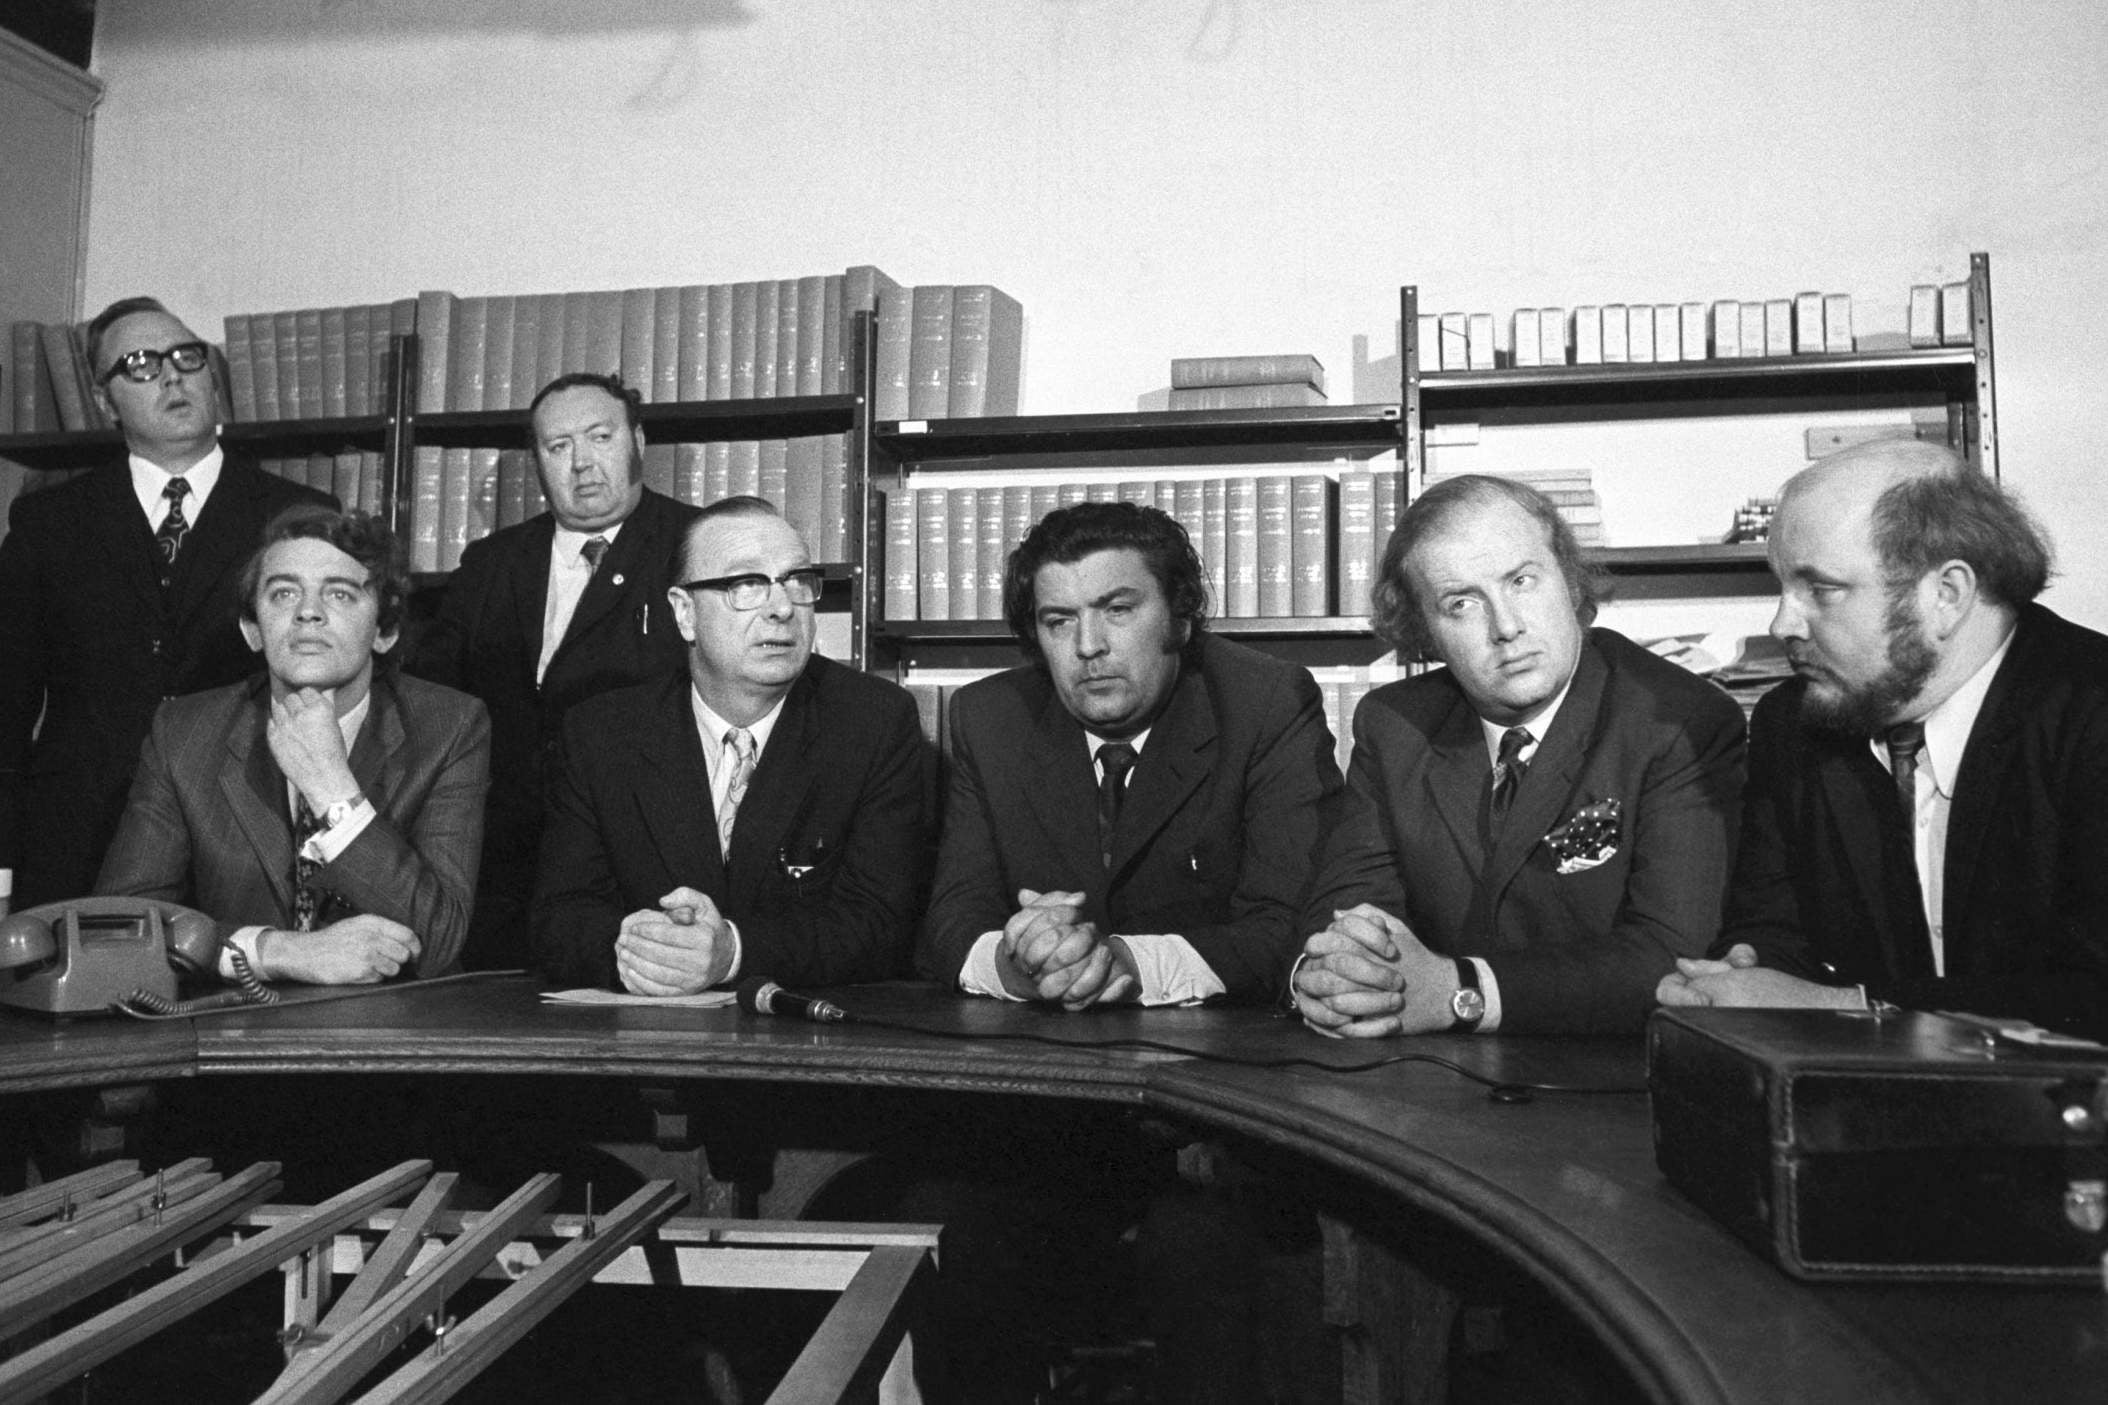 SDLP members (from left): Austin Currie, Gerry Fitt, John Hume, Ivan Cooper and Paddy O'Hanlon. Behind them is Edward McGrady (left) and Paddy Devlin